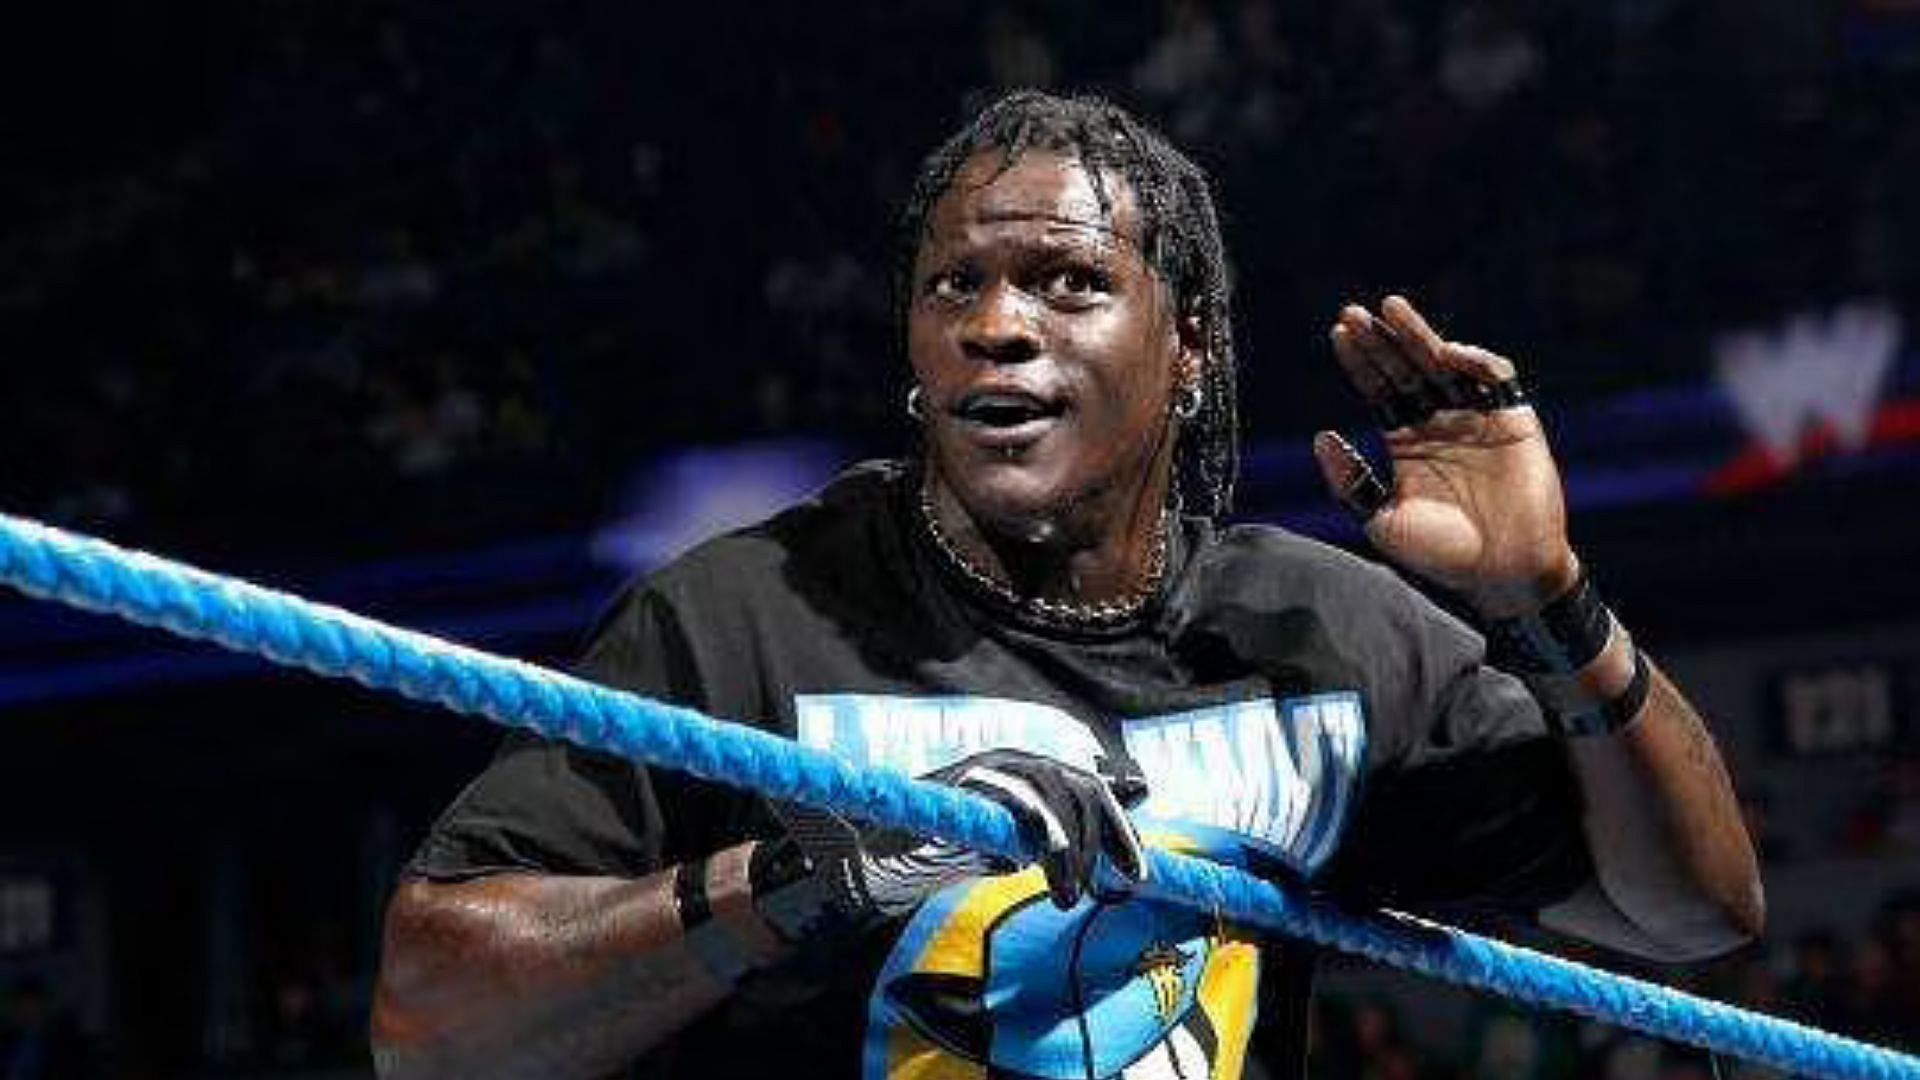 R-Truth sold weed to make ends meet as a child